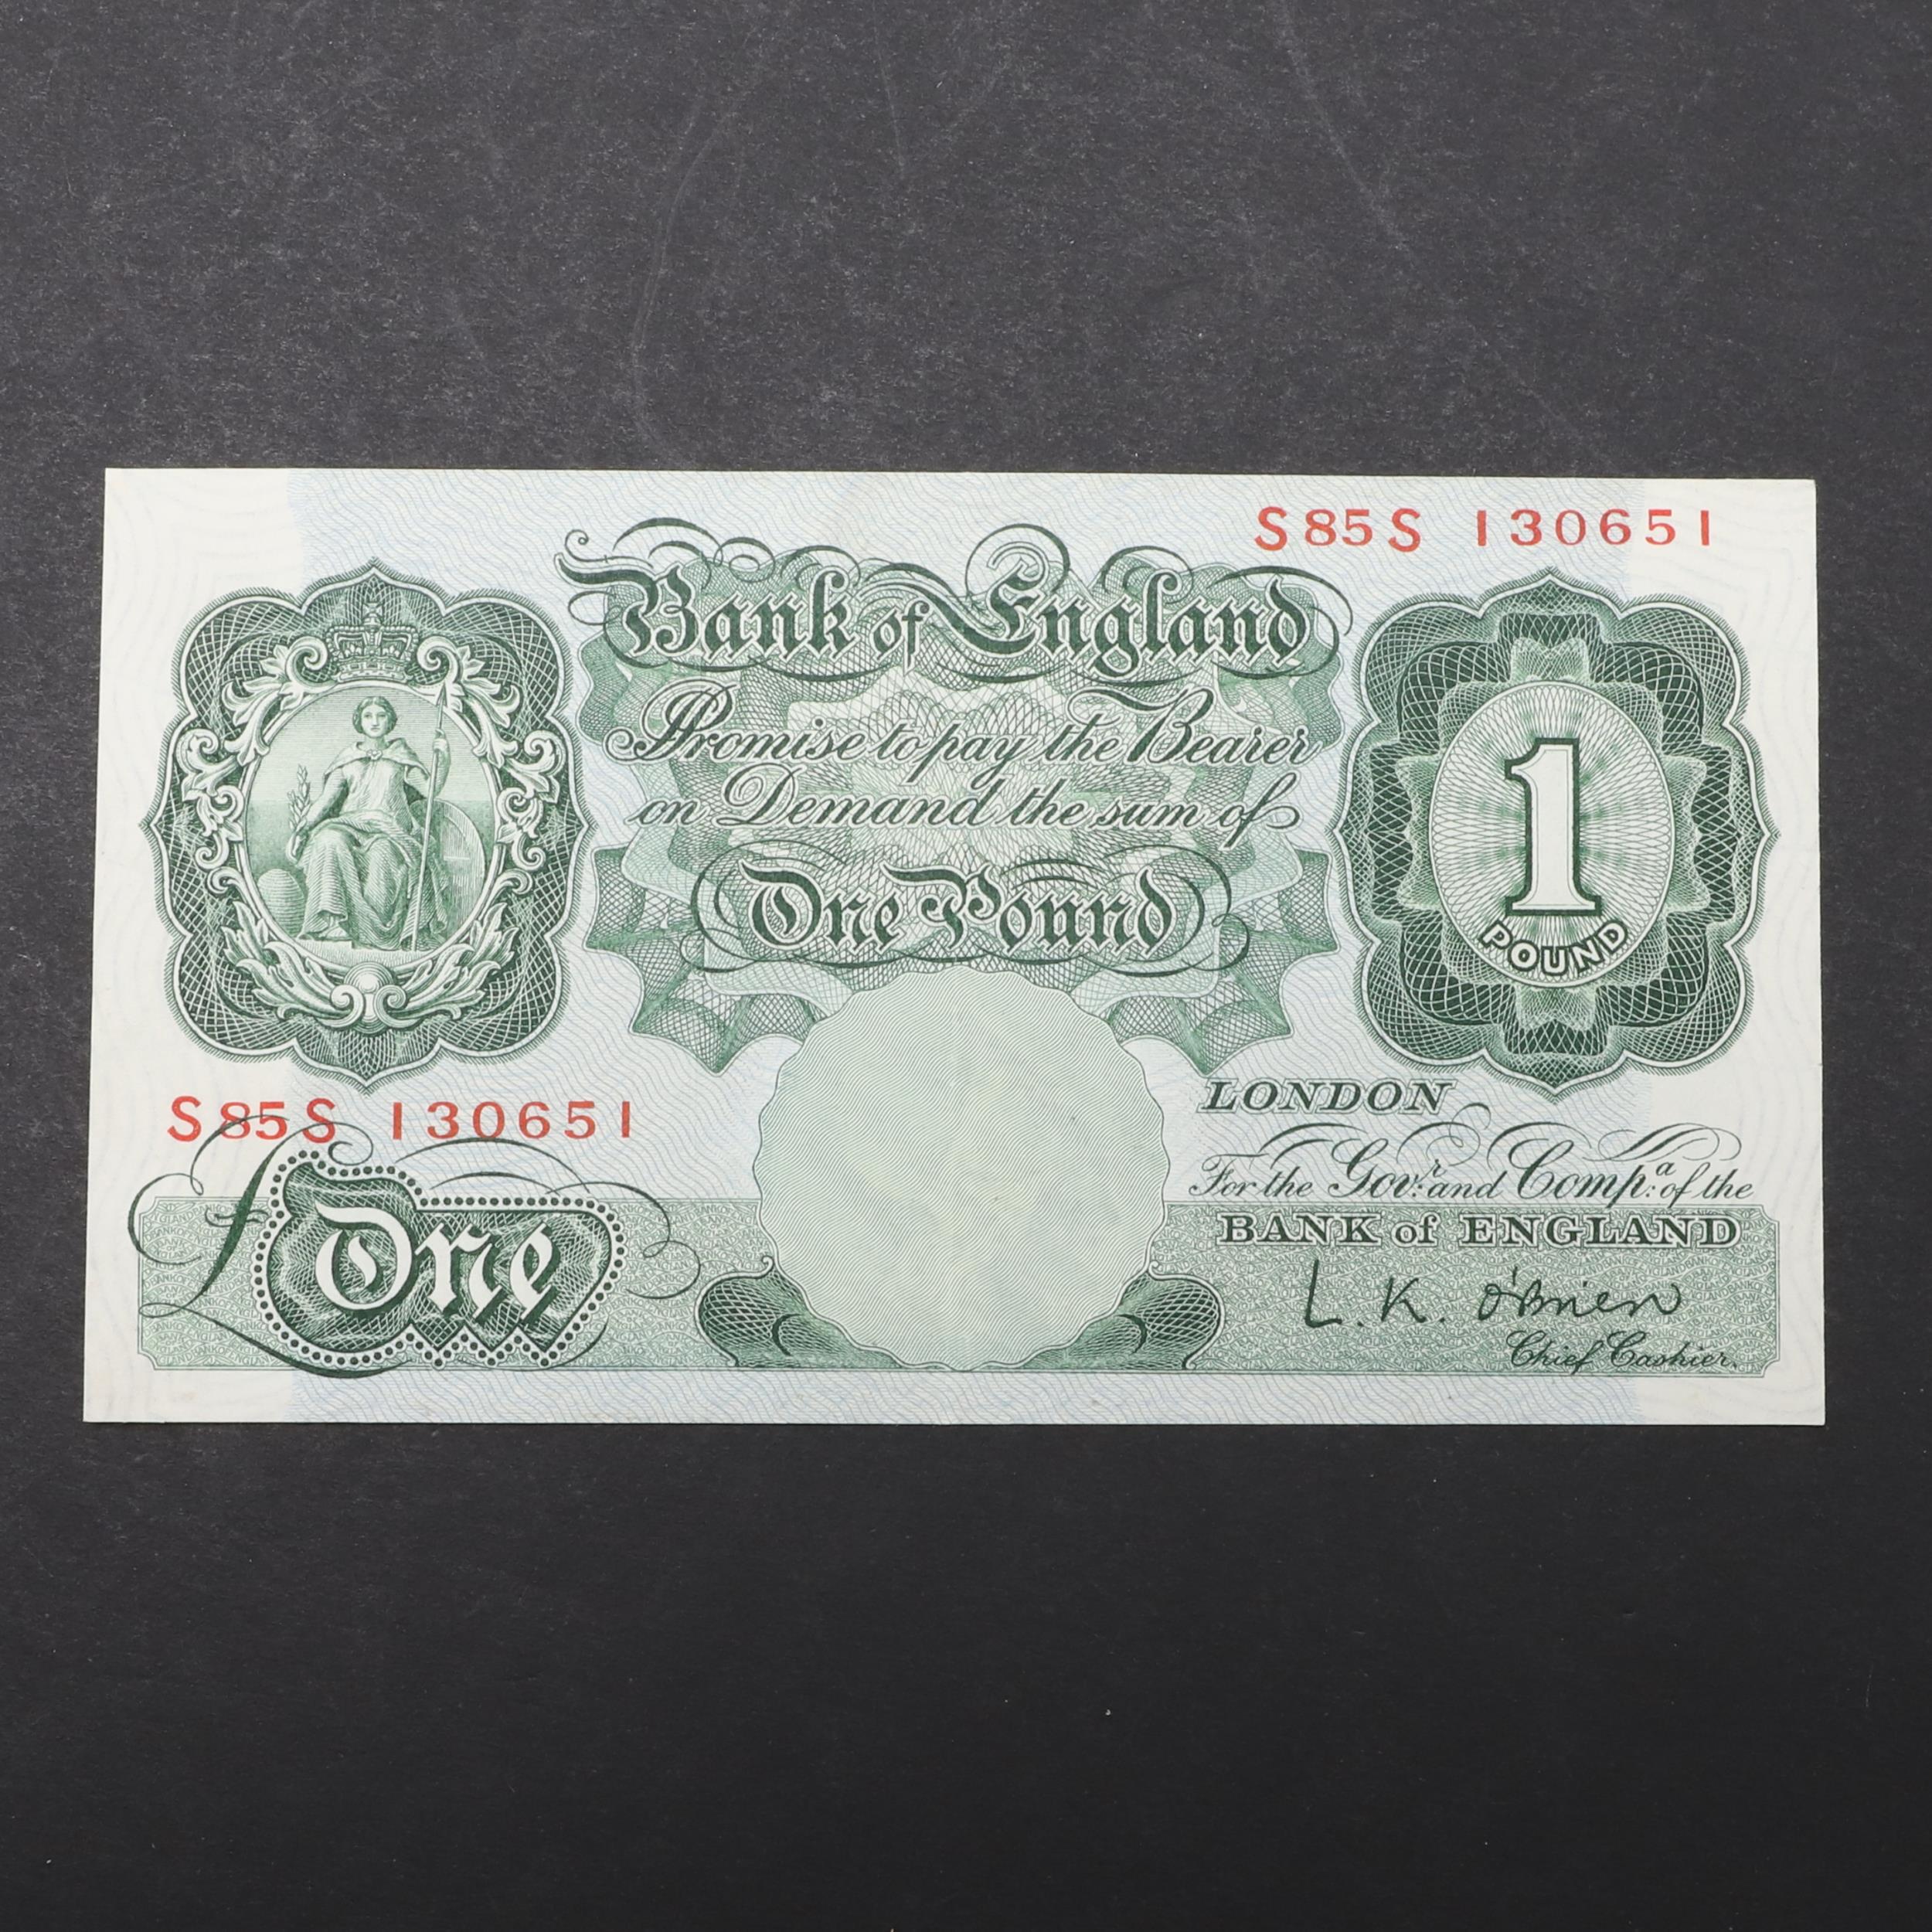 A BANK OF ENGLAND SEIRES 'A' BRITANNIA ISSUE ONE POUND NOTE.